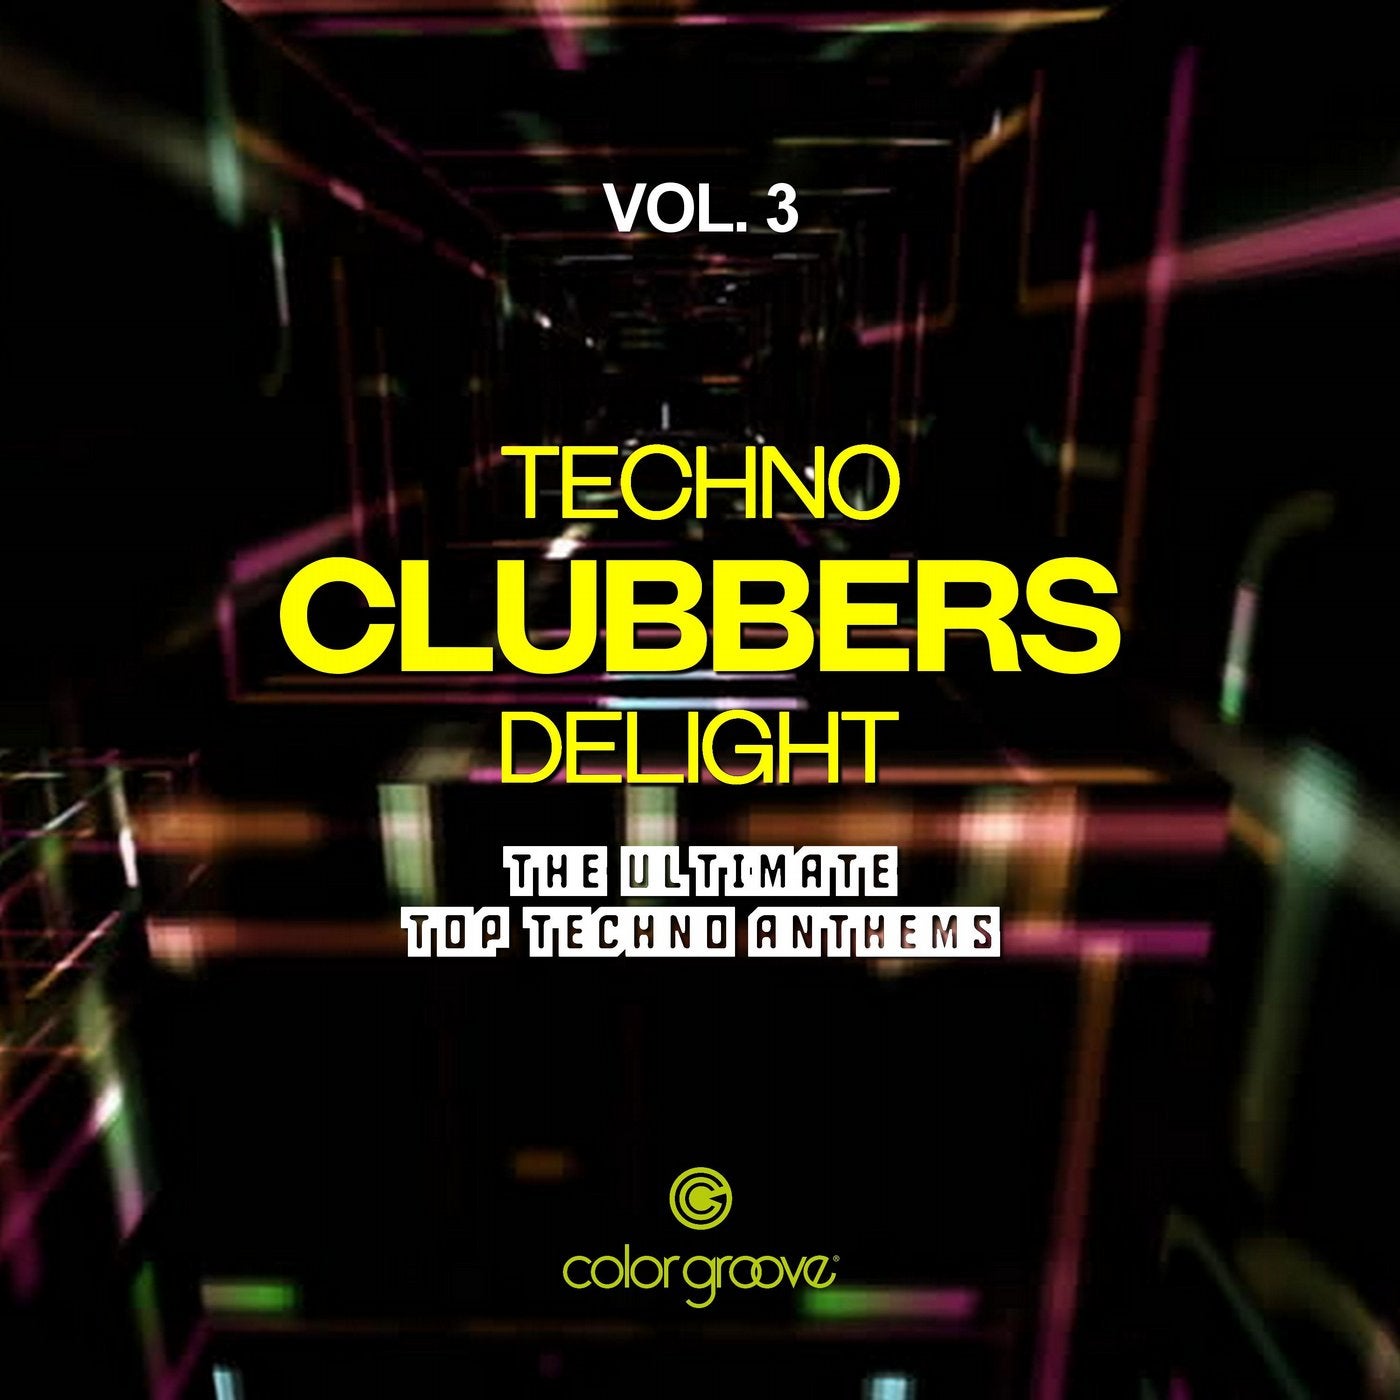 Techno Clubbers Delight, Vol. 3 (The Ultimate Top Techno Anthems)